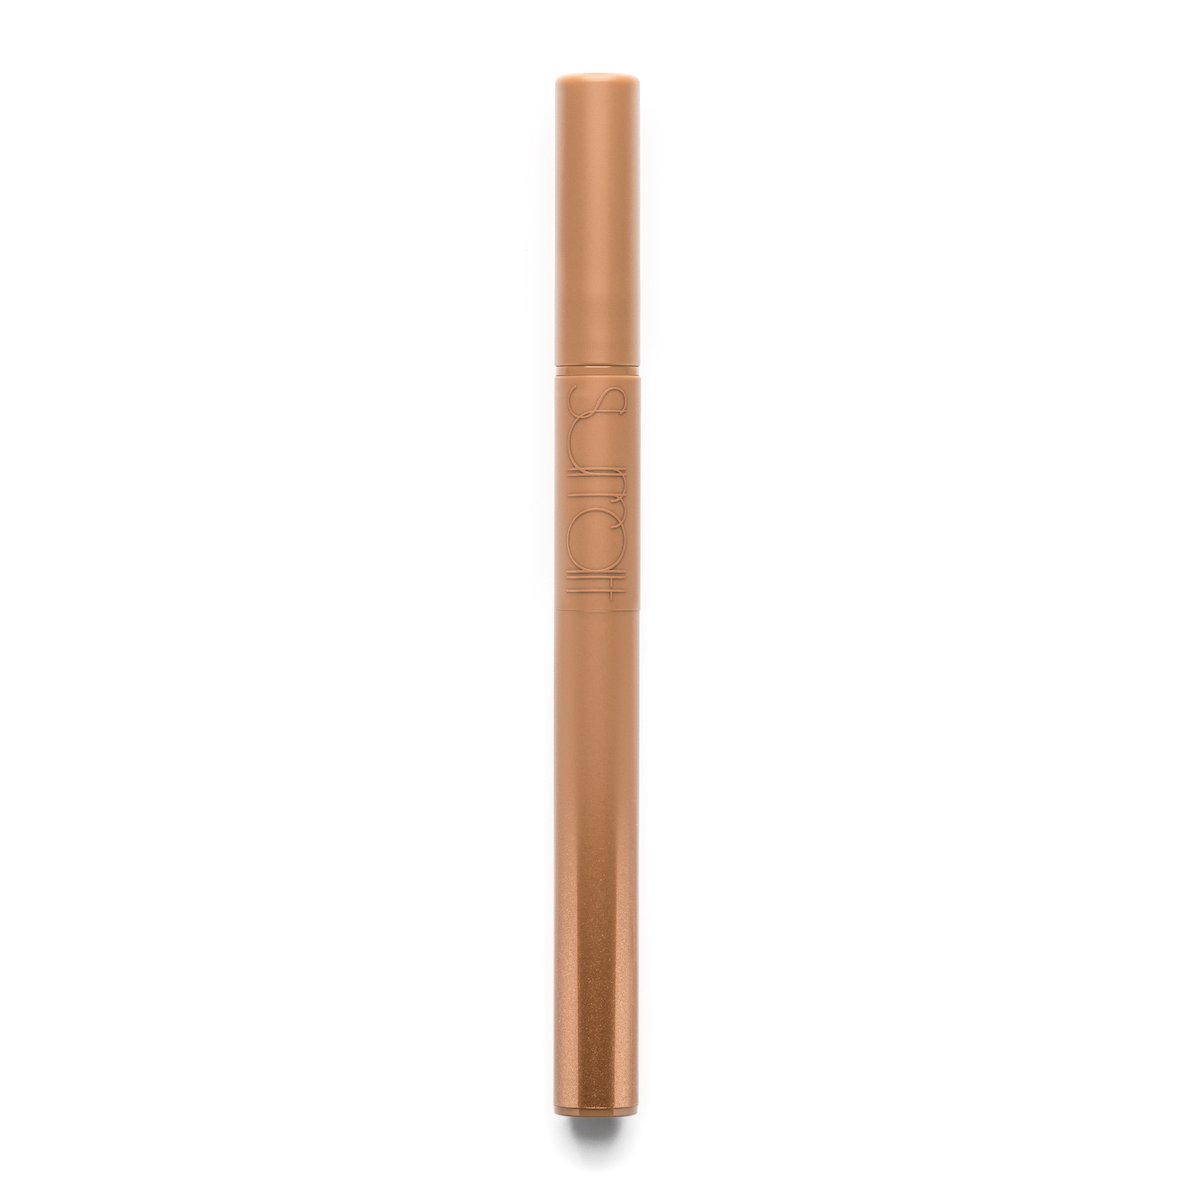 MOUSSEUX - Chamois with Champagne Sparkle - eye brightening dual-ended pencil with color correcting waterline liner and shimmer powder